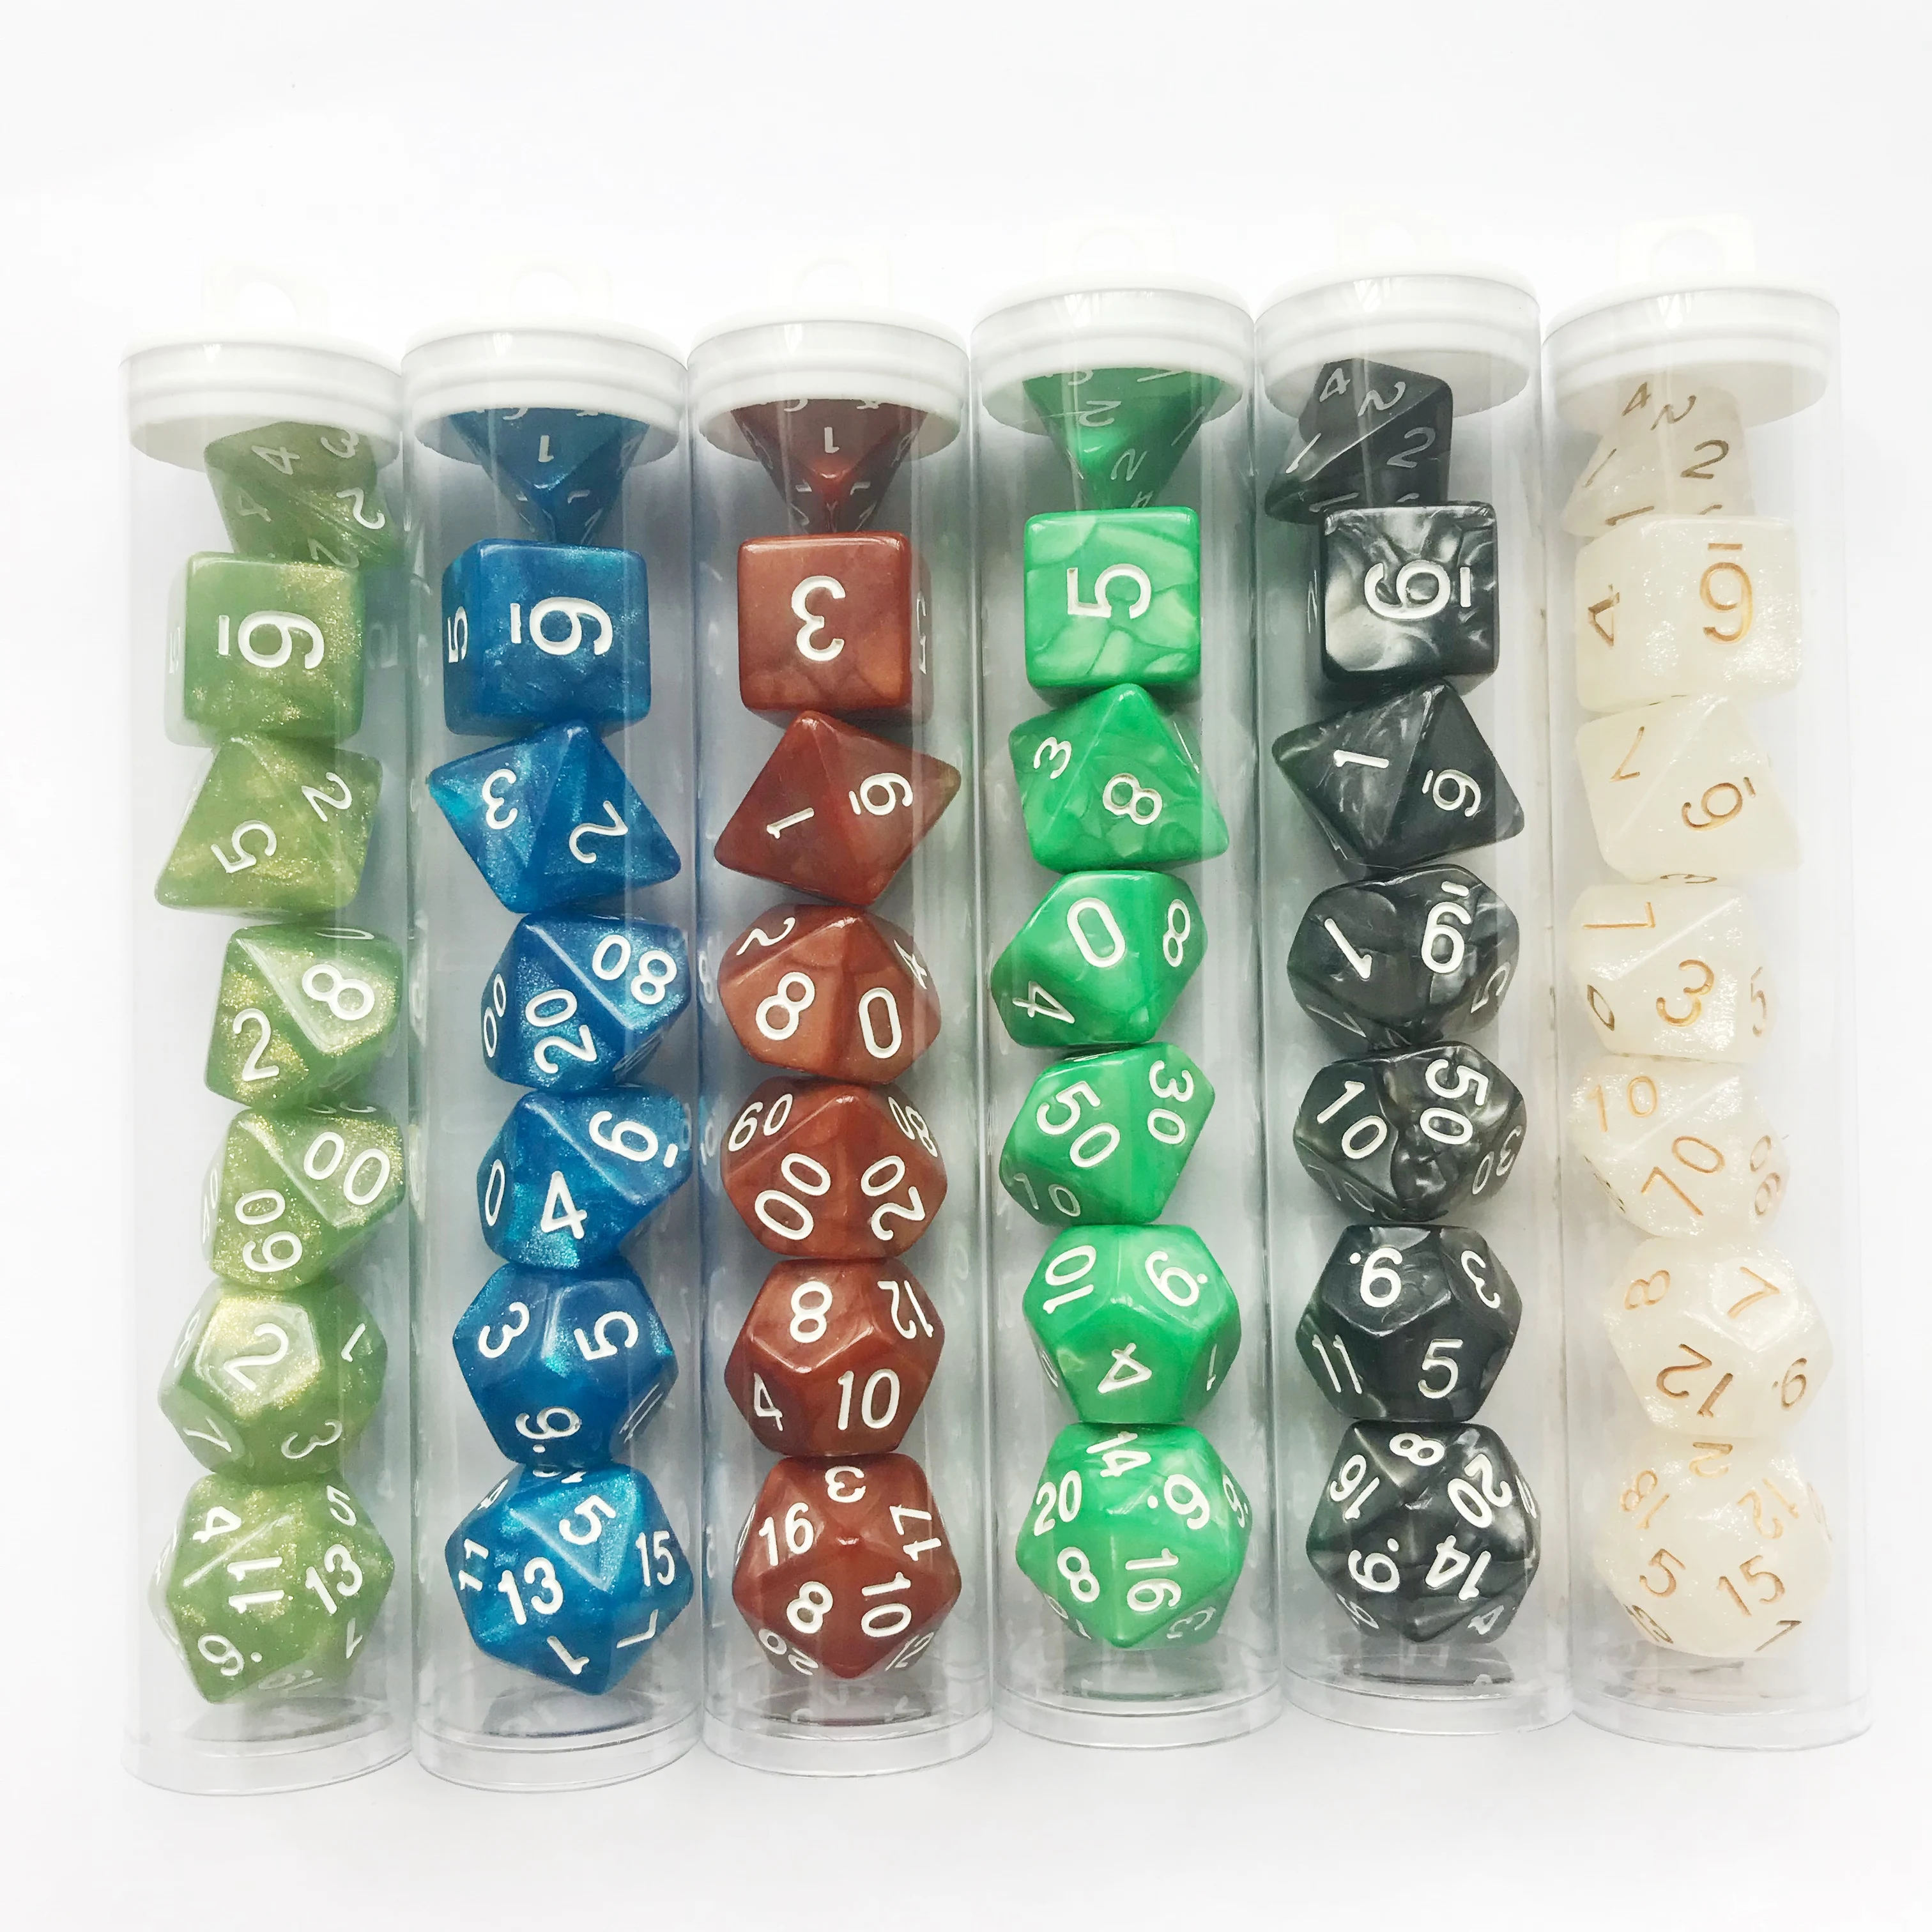 7 Pcs/set Desk Polyhedral Custom Dice 4/6/8/10/12/20 Pear Dnd Acrylic Dice  Set In Tube Packaging Or Dice Bag Multi Side Gaming - Buy Dice,Custom Dice, Dice Bag Product on Alibaba.com